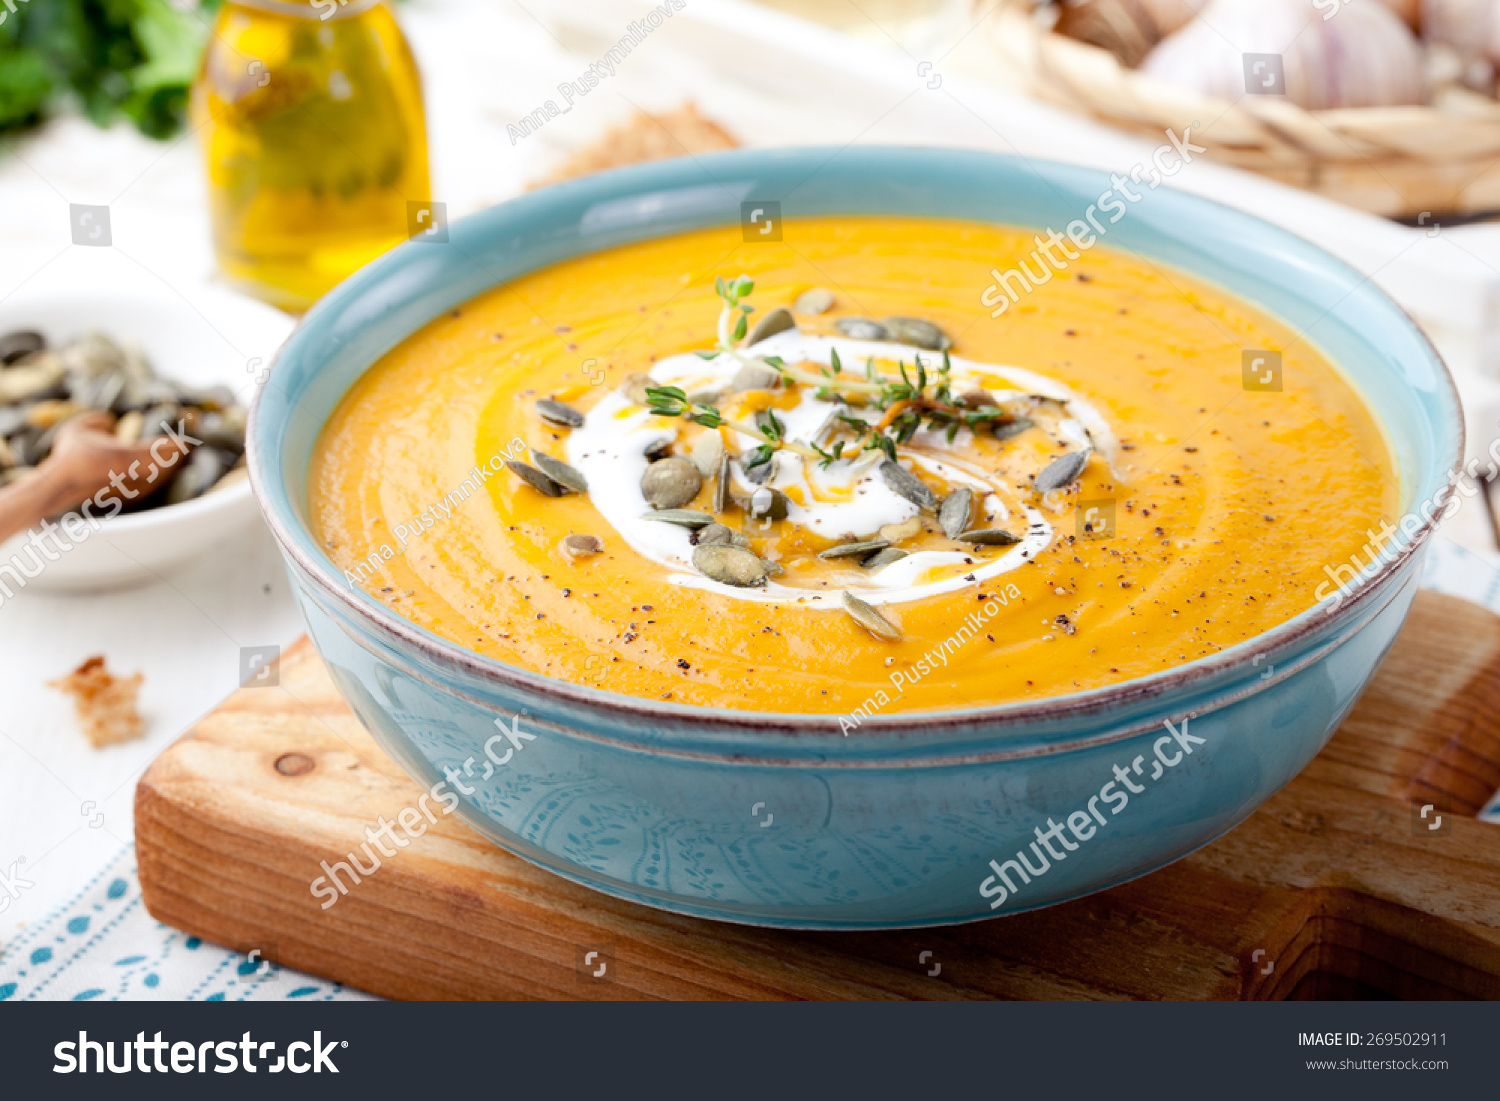 Roasted pumpkin and carrot soup with cream and pumpkin seeds on white wooden background. Copy space #269502911